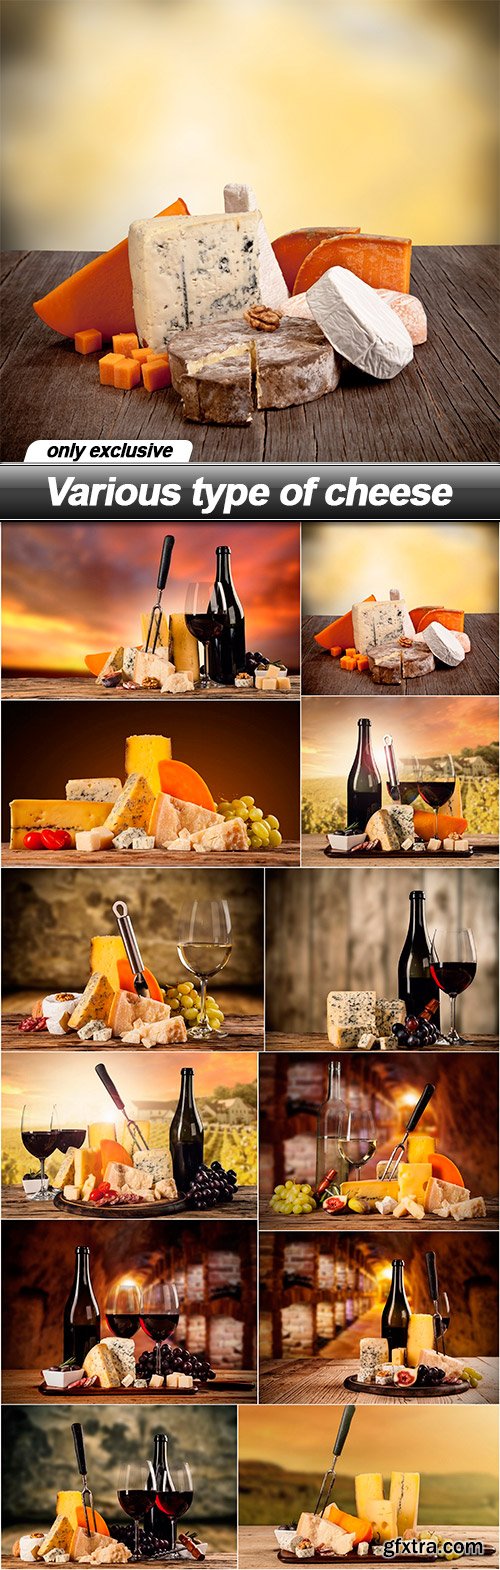 Various type of cheese - 12 UHQ JPEG